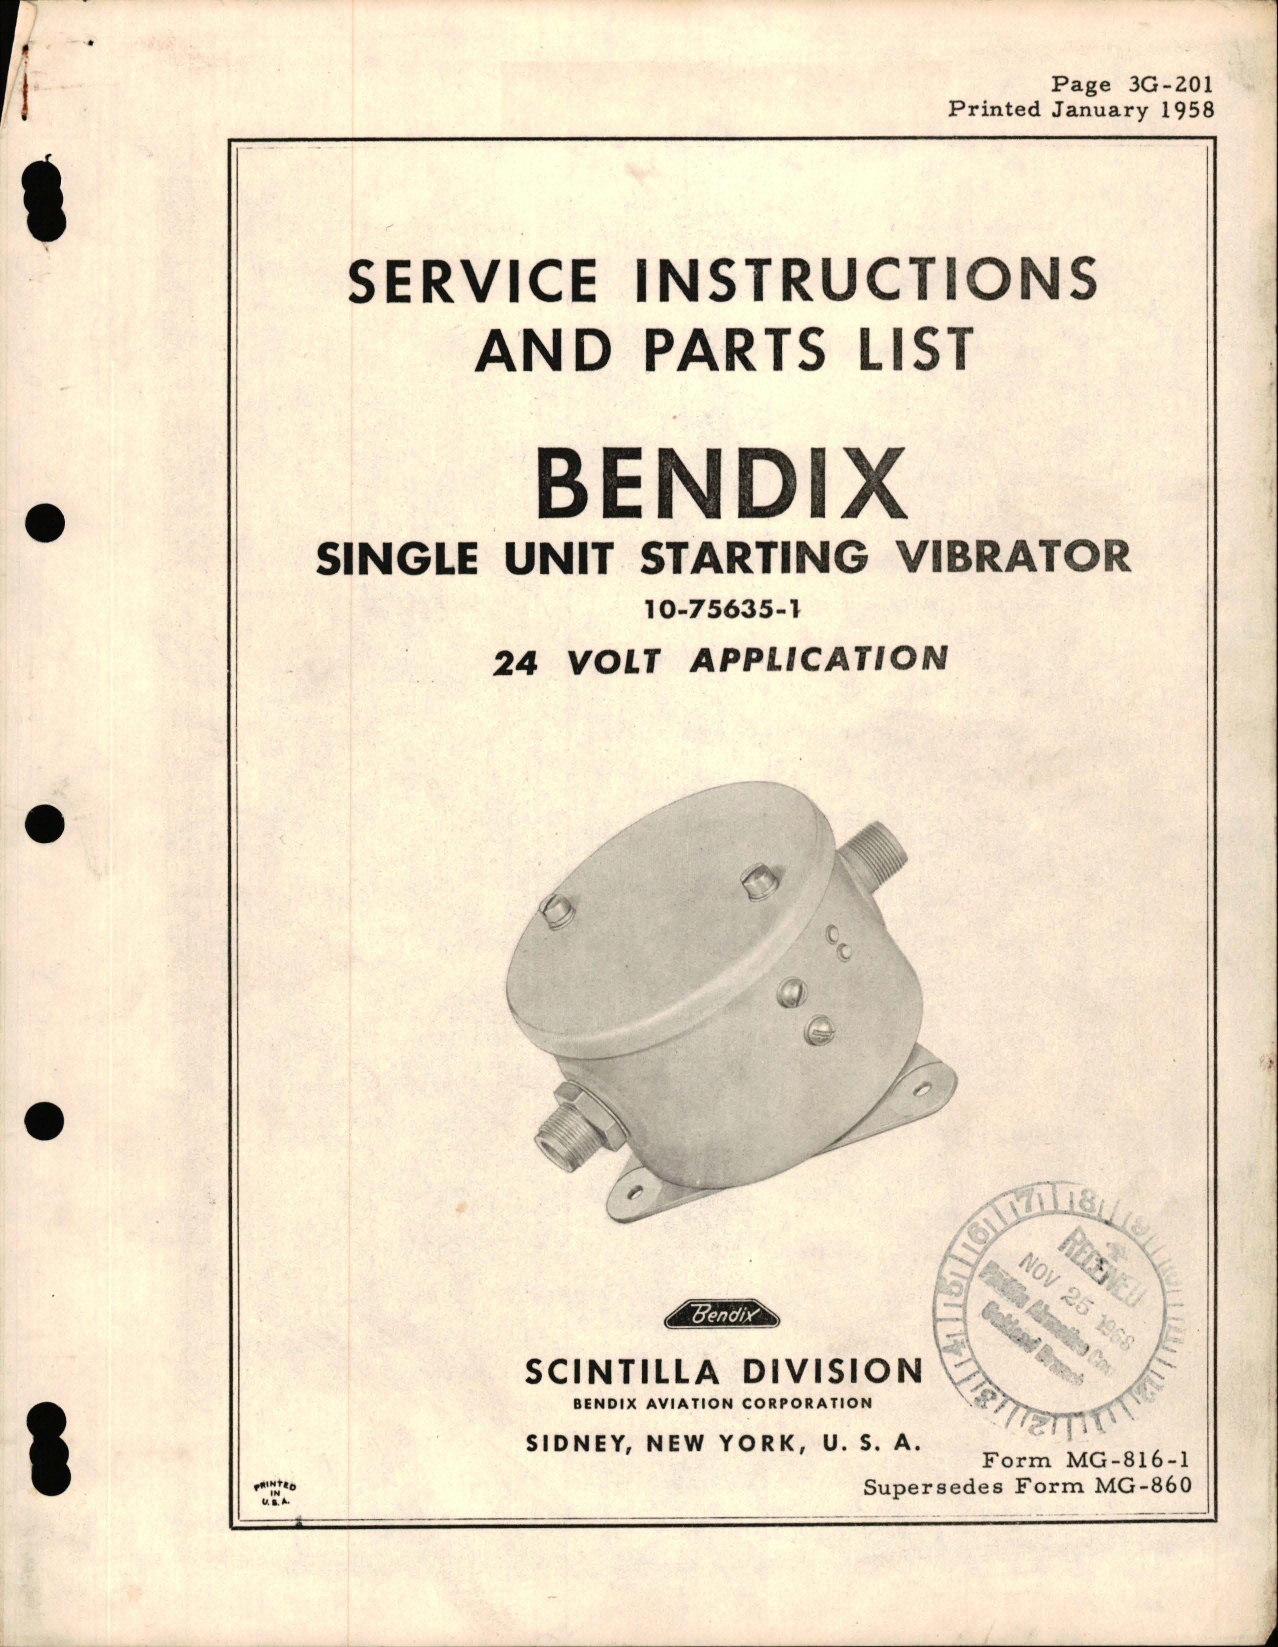 Sample page 1 from AirCorps Library document: Service Instructions with Parts List for Bendix Single Unit Starting Vibrator 10-75635-1